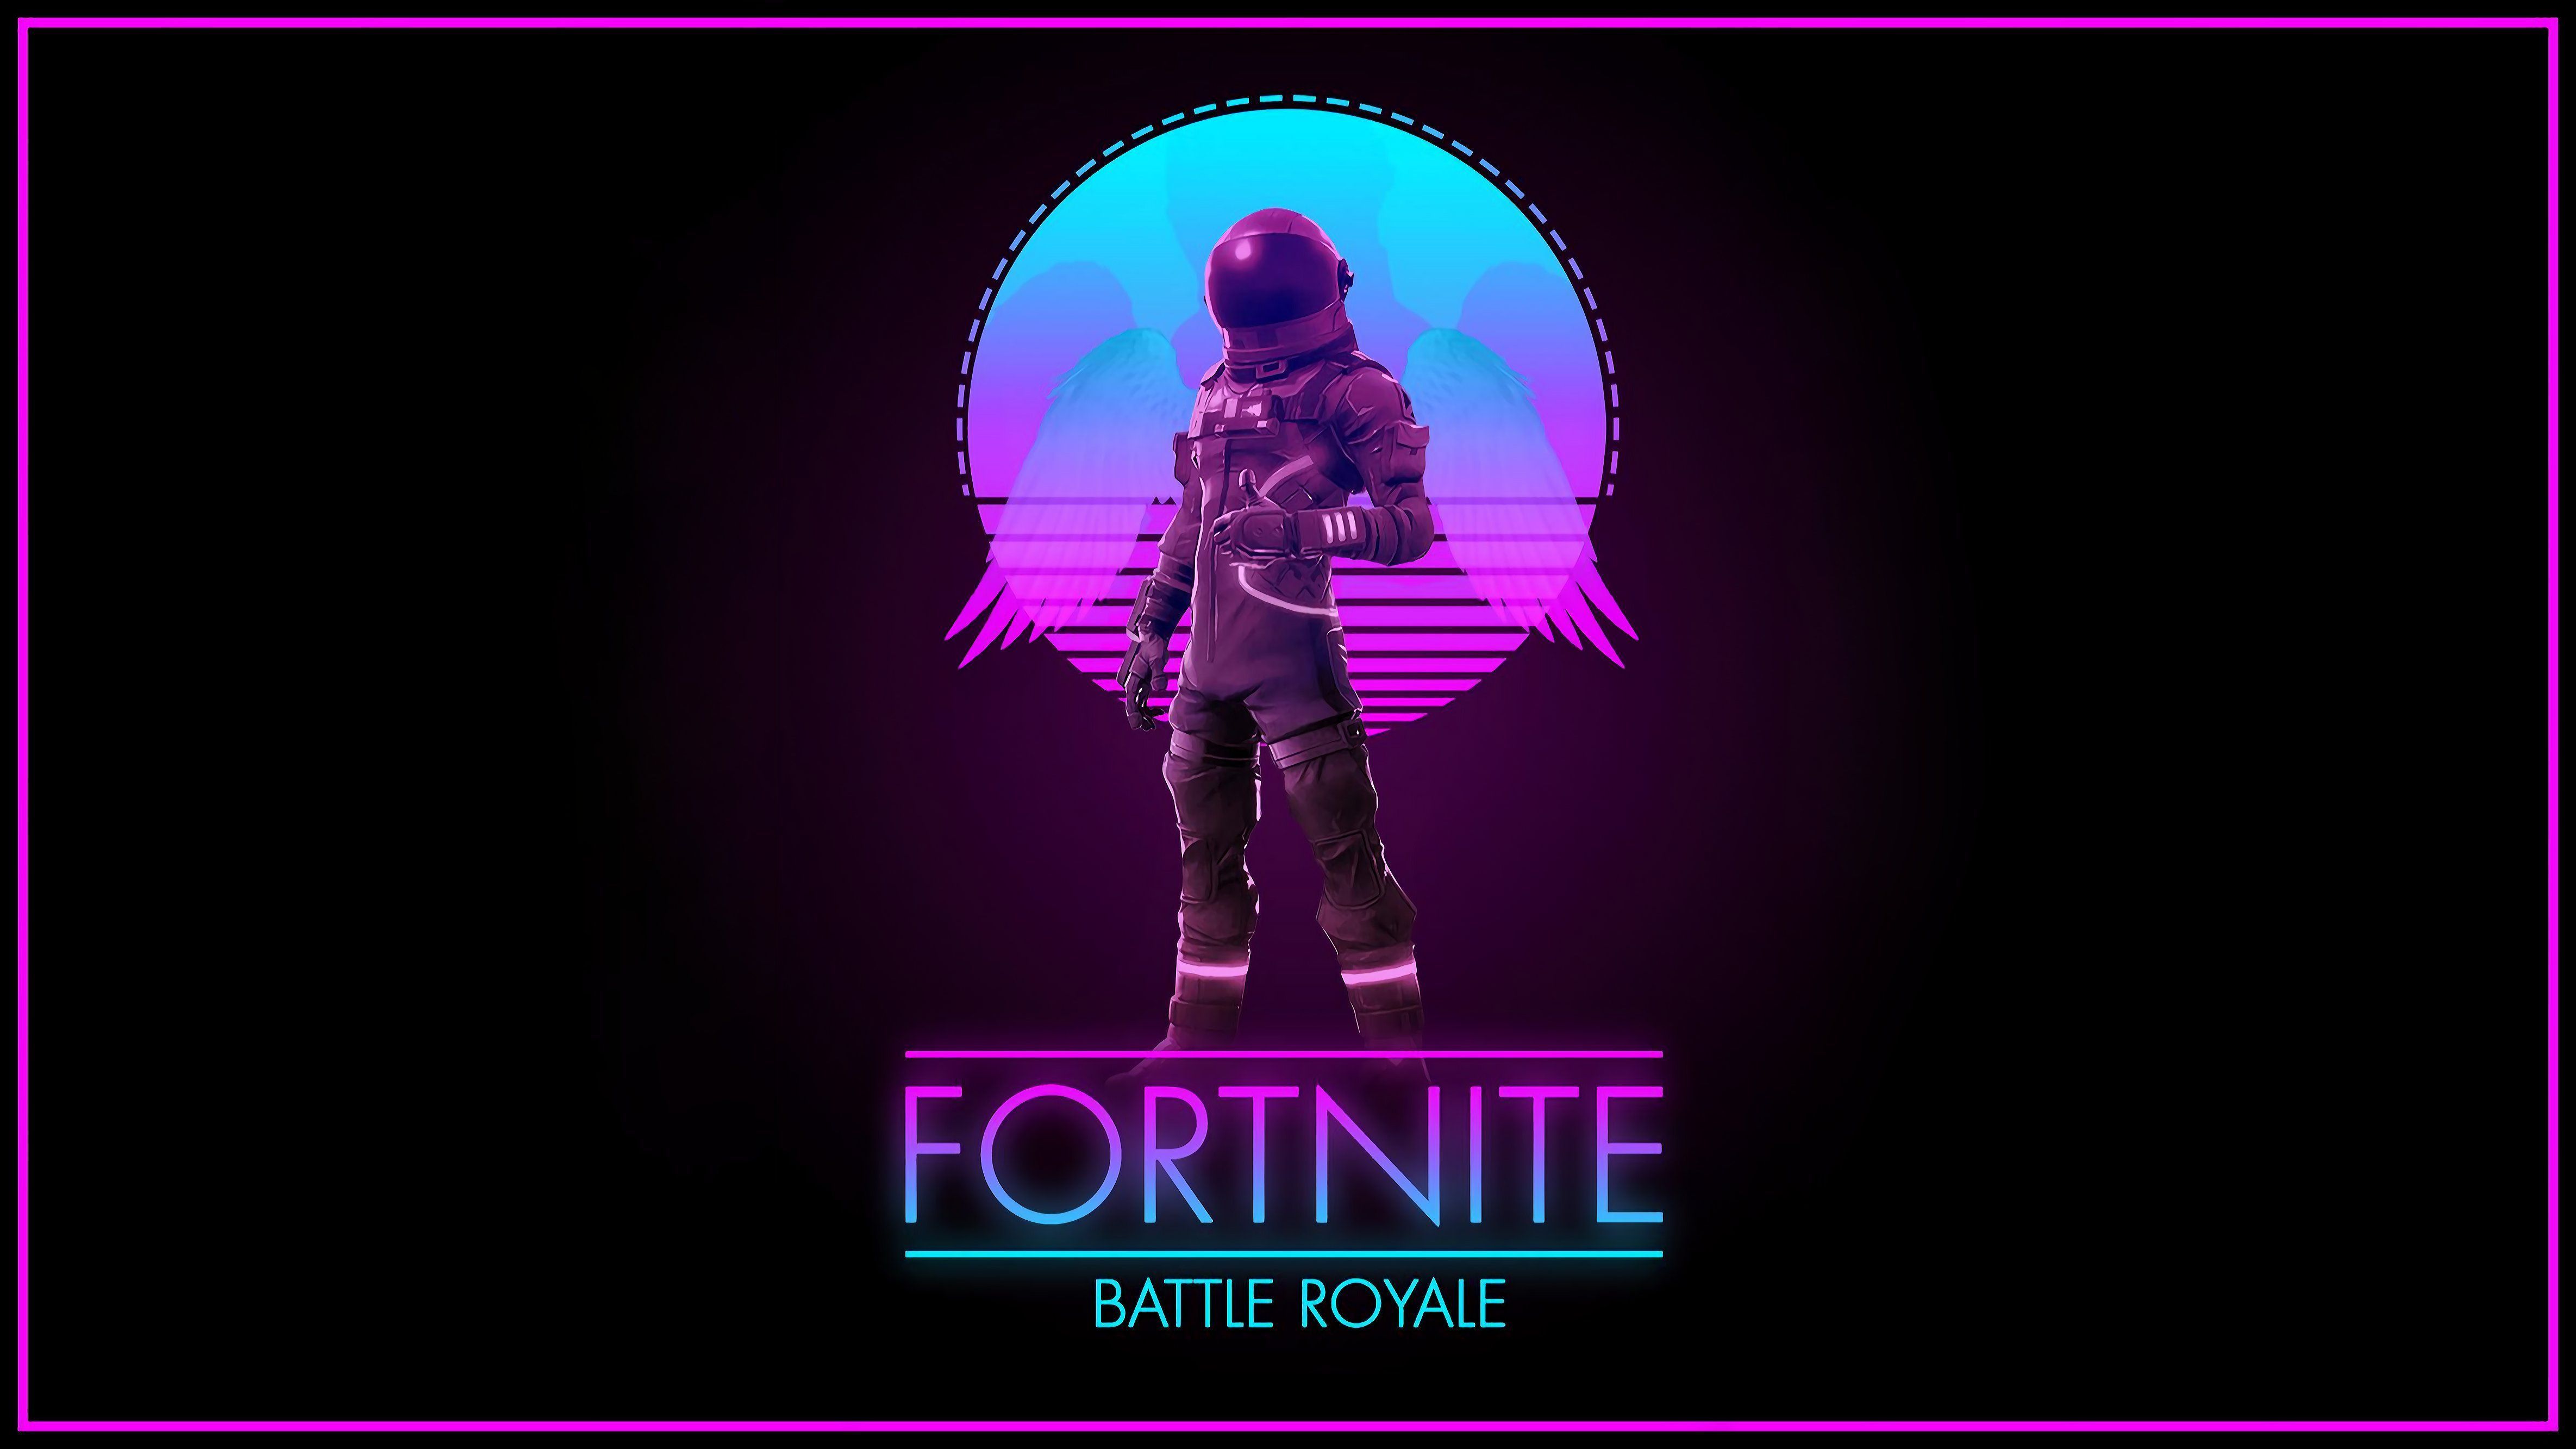 Wallpaper Cool Aesthetic Background Fortnite Picture